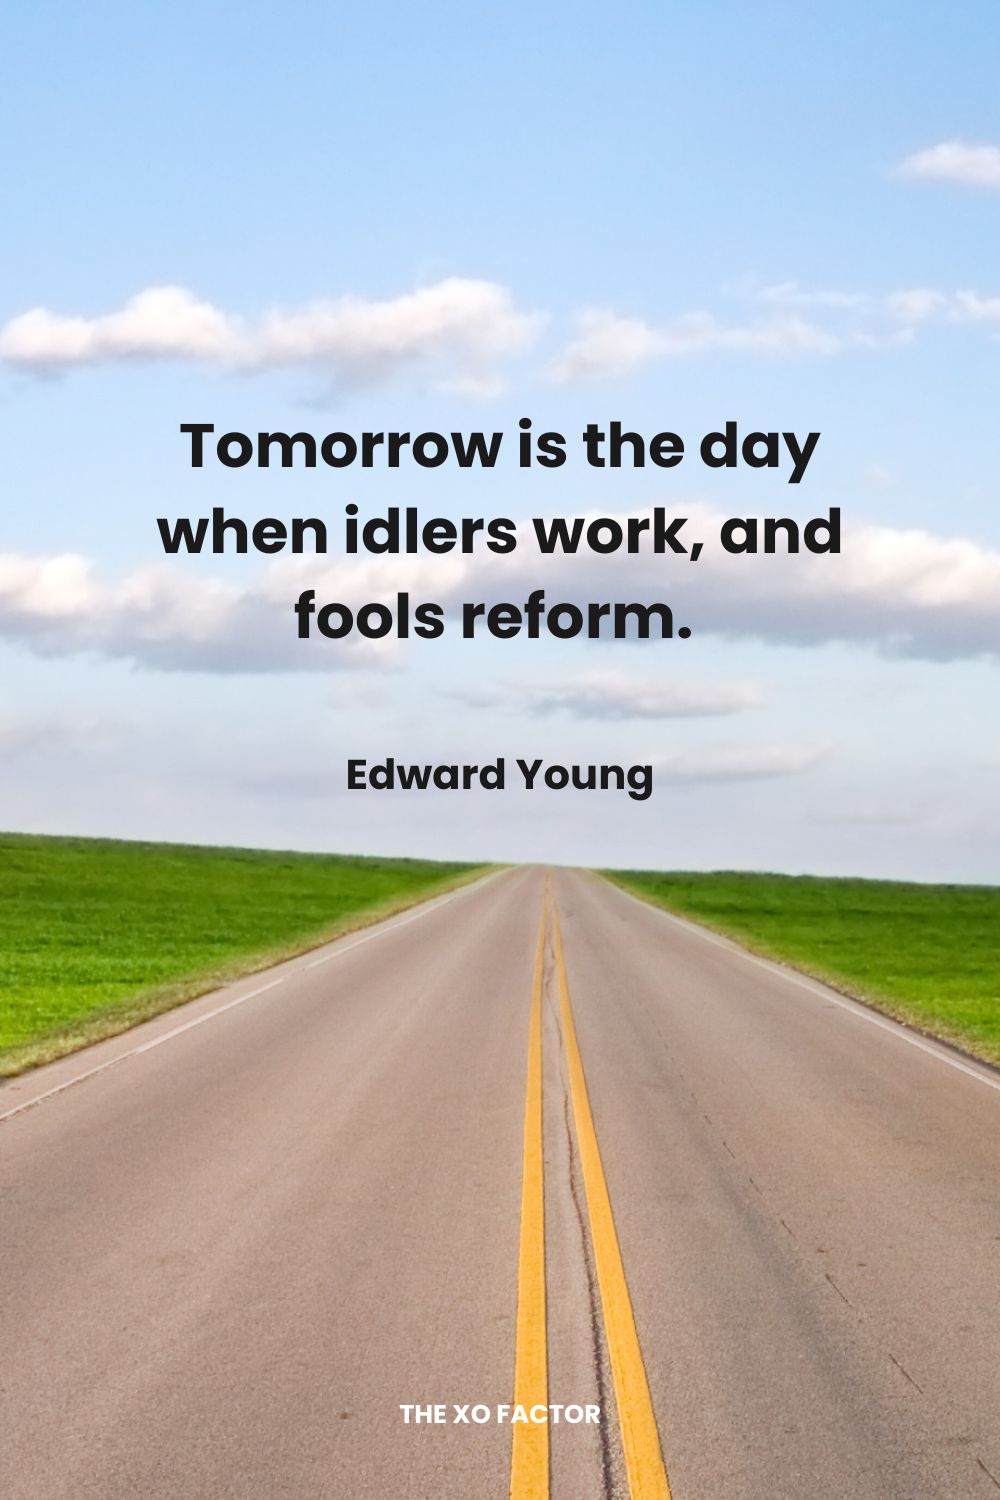 Tomorrow is the day when idlers work, and fools reform. Edward Young